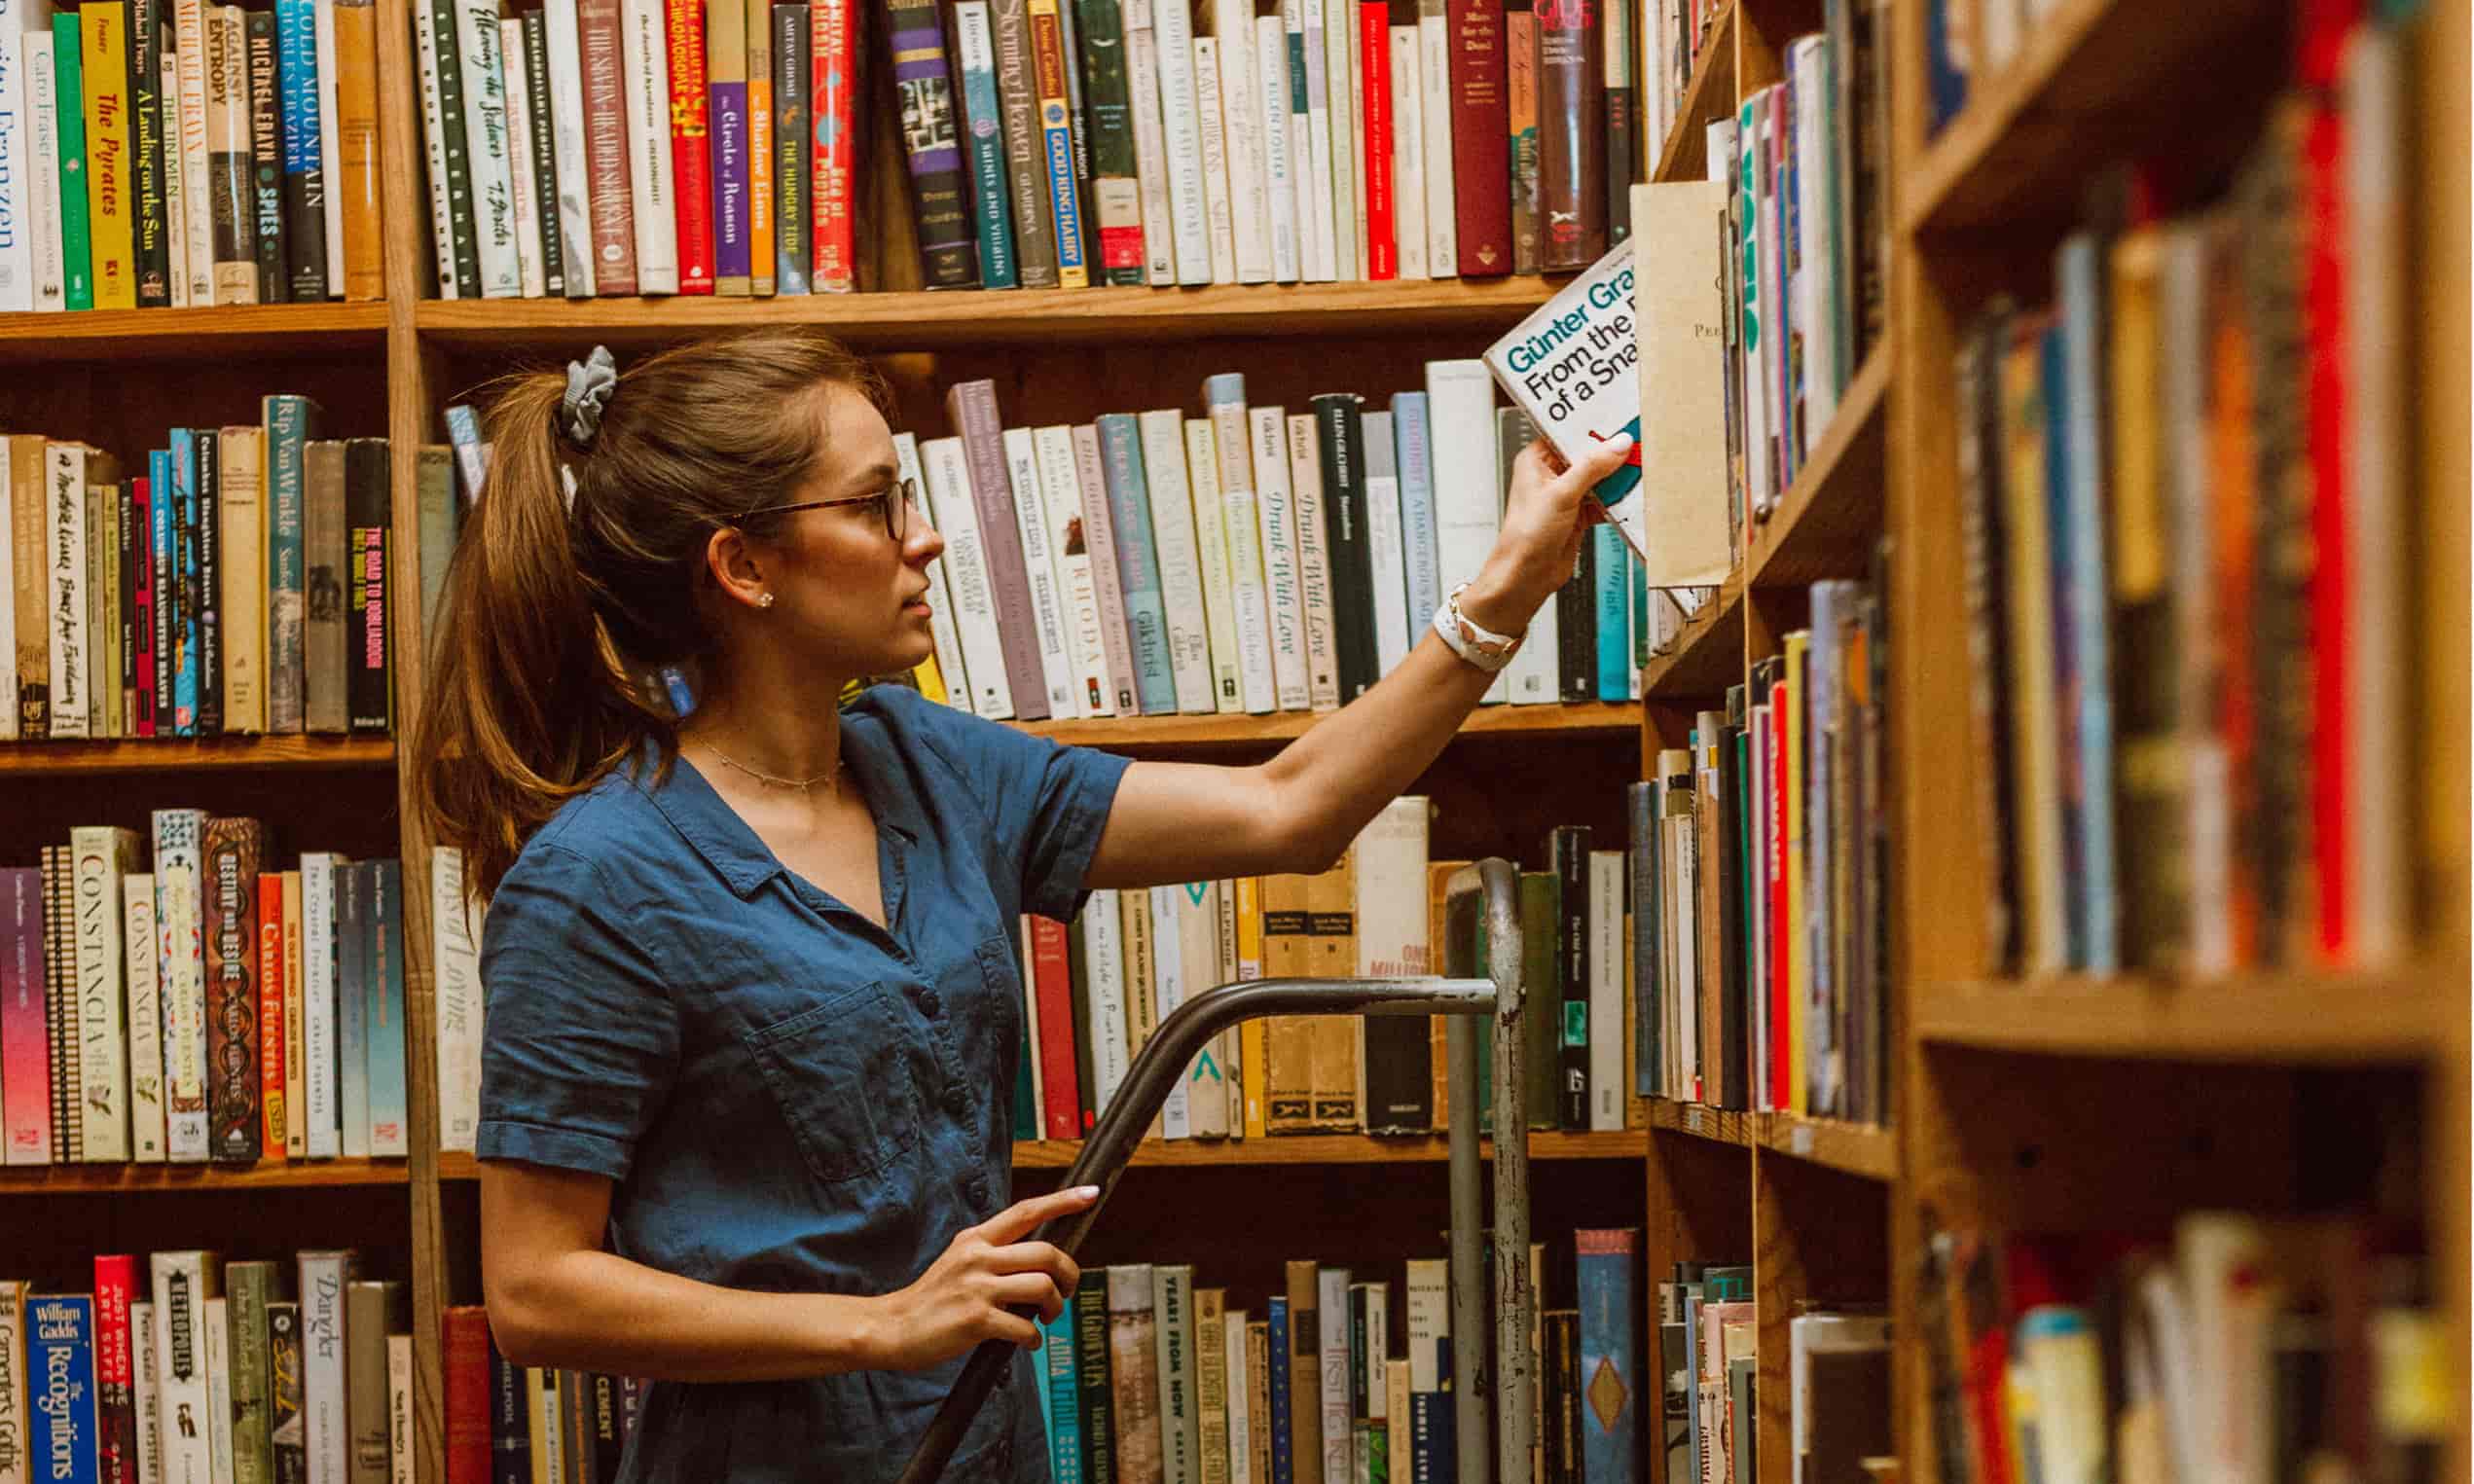 A woman surrounded by shelves filled with books is taking a book off one of the shelves